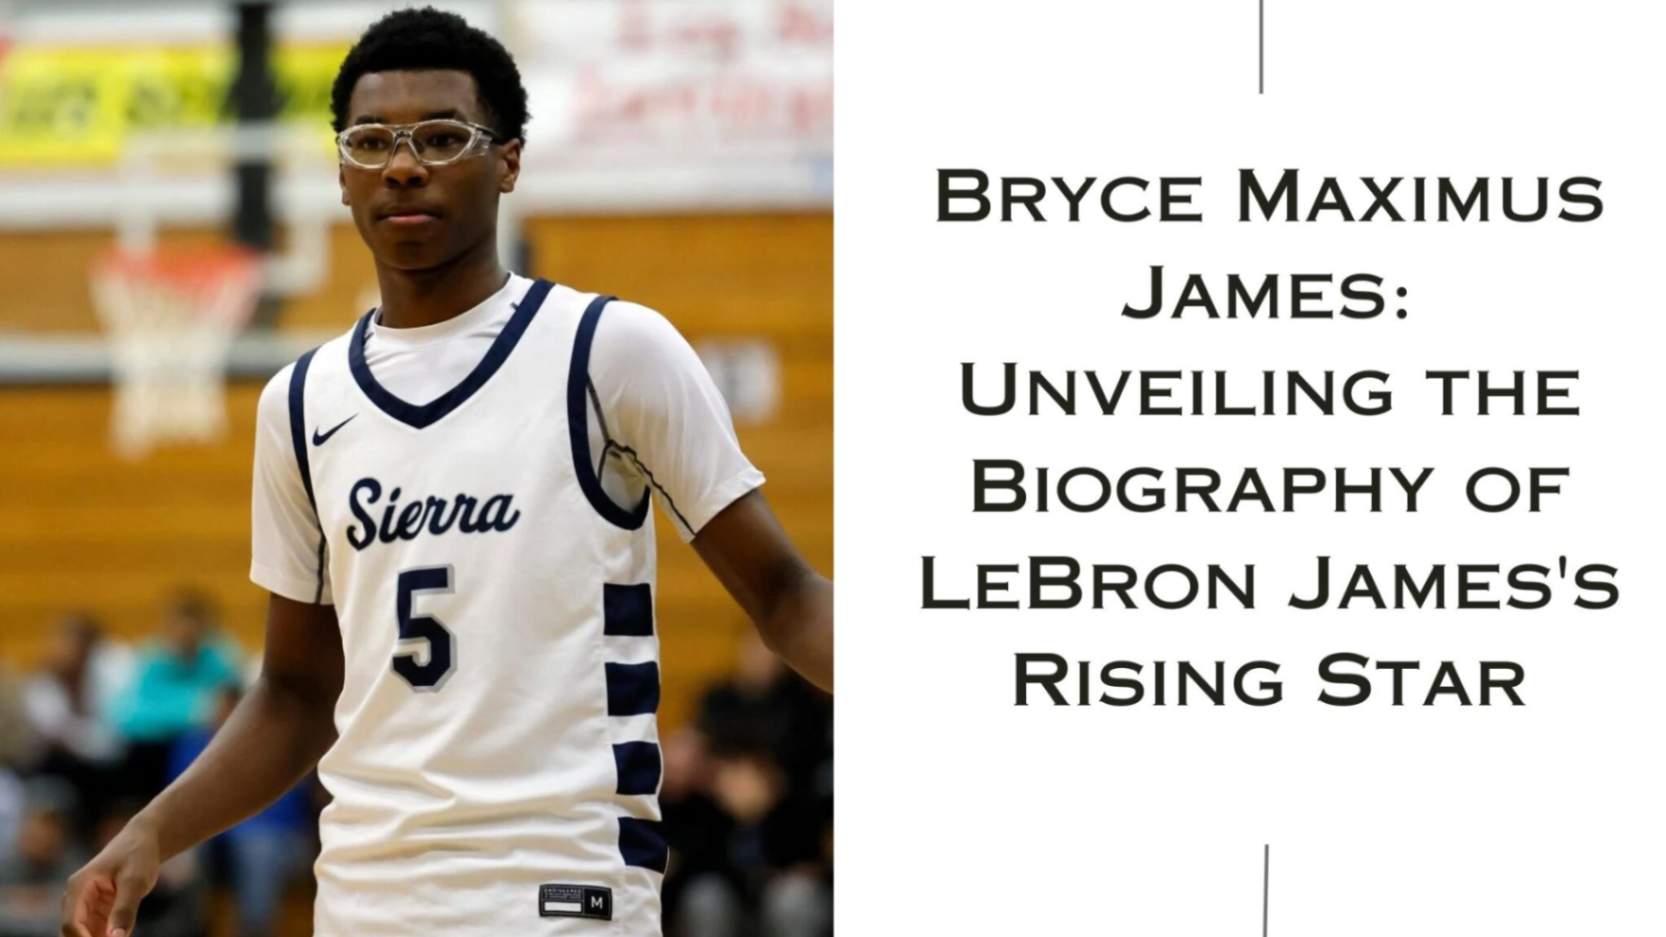 Bryce Maximus James: Unveiling the Biography of LeBron James's Rising Star